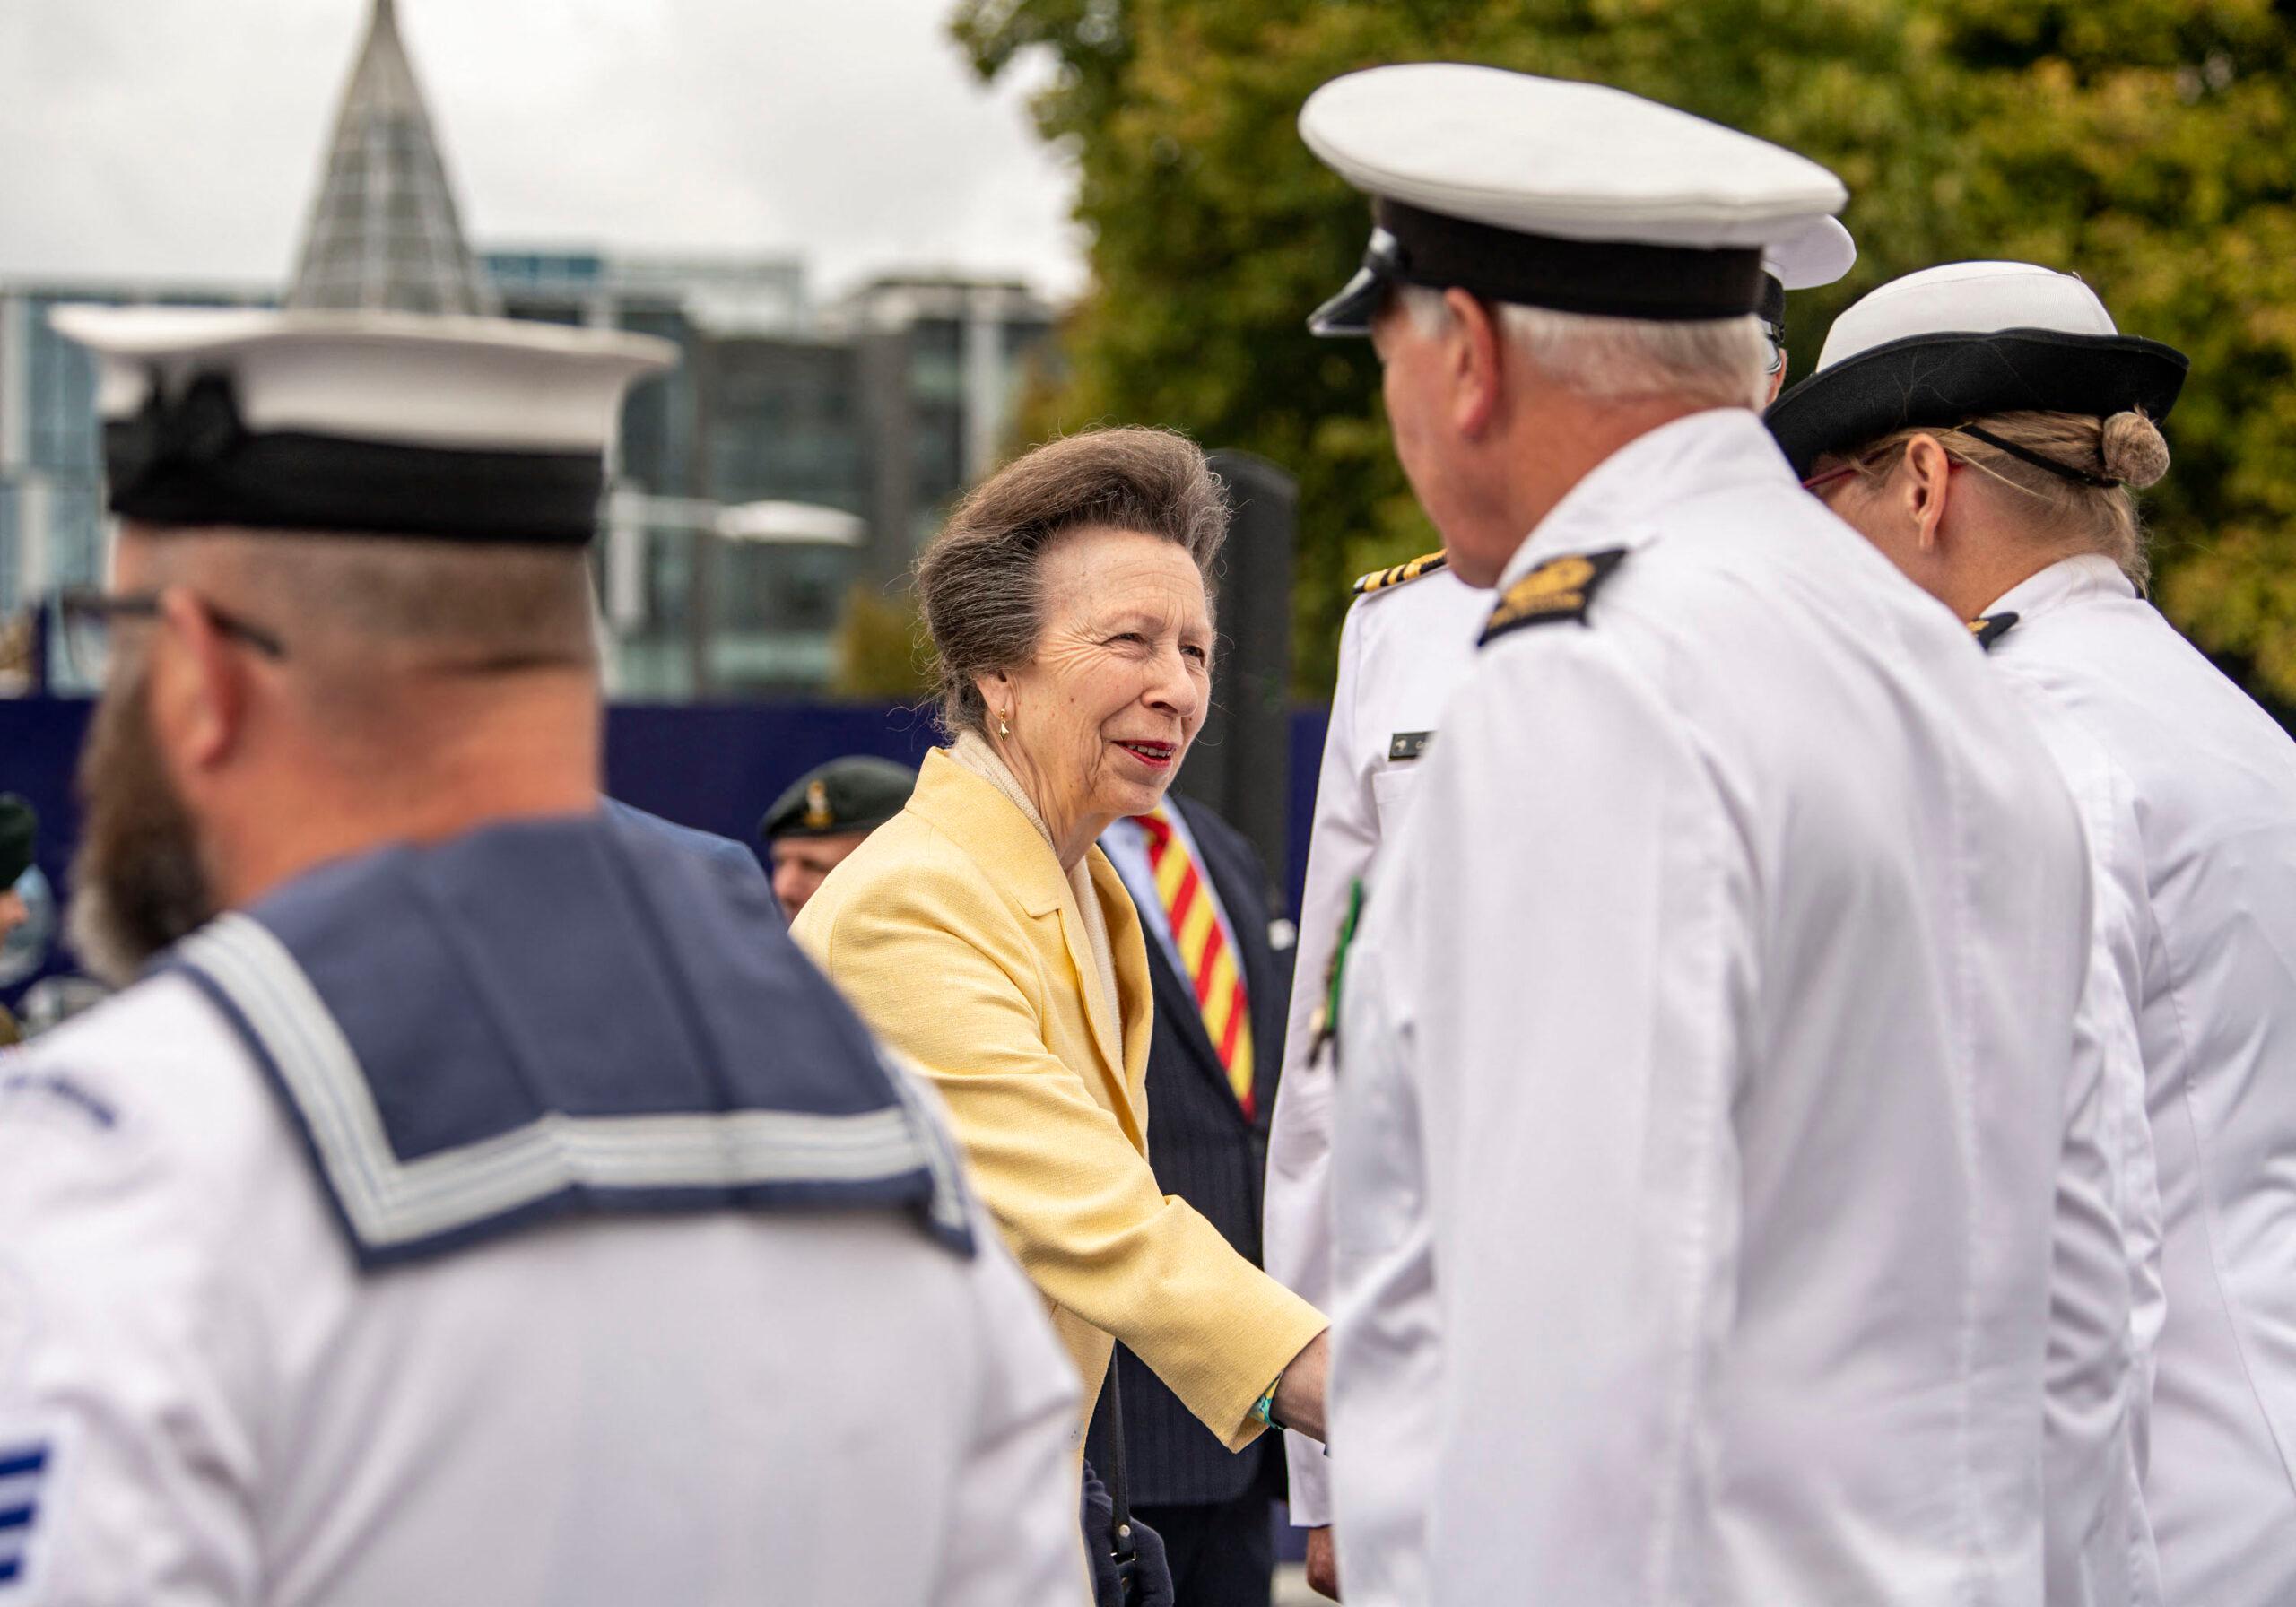 Princess Anne on Royal duties in New Zealand